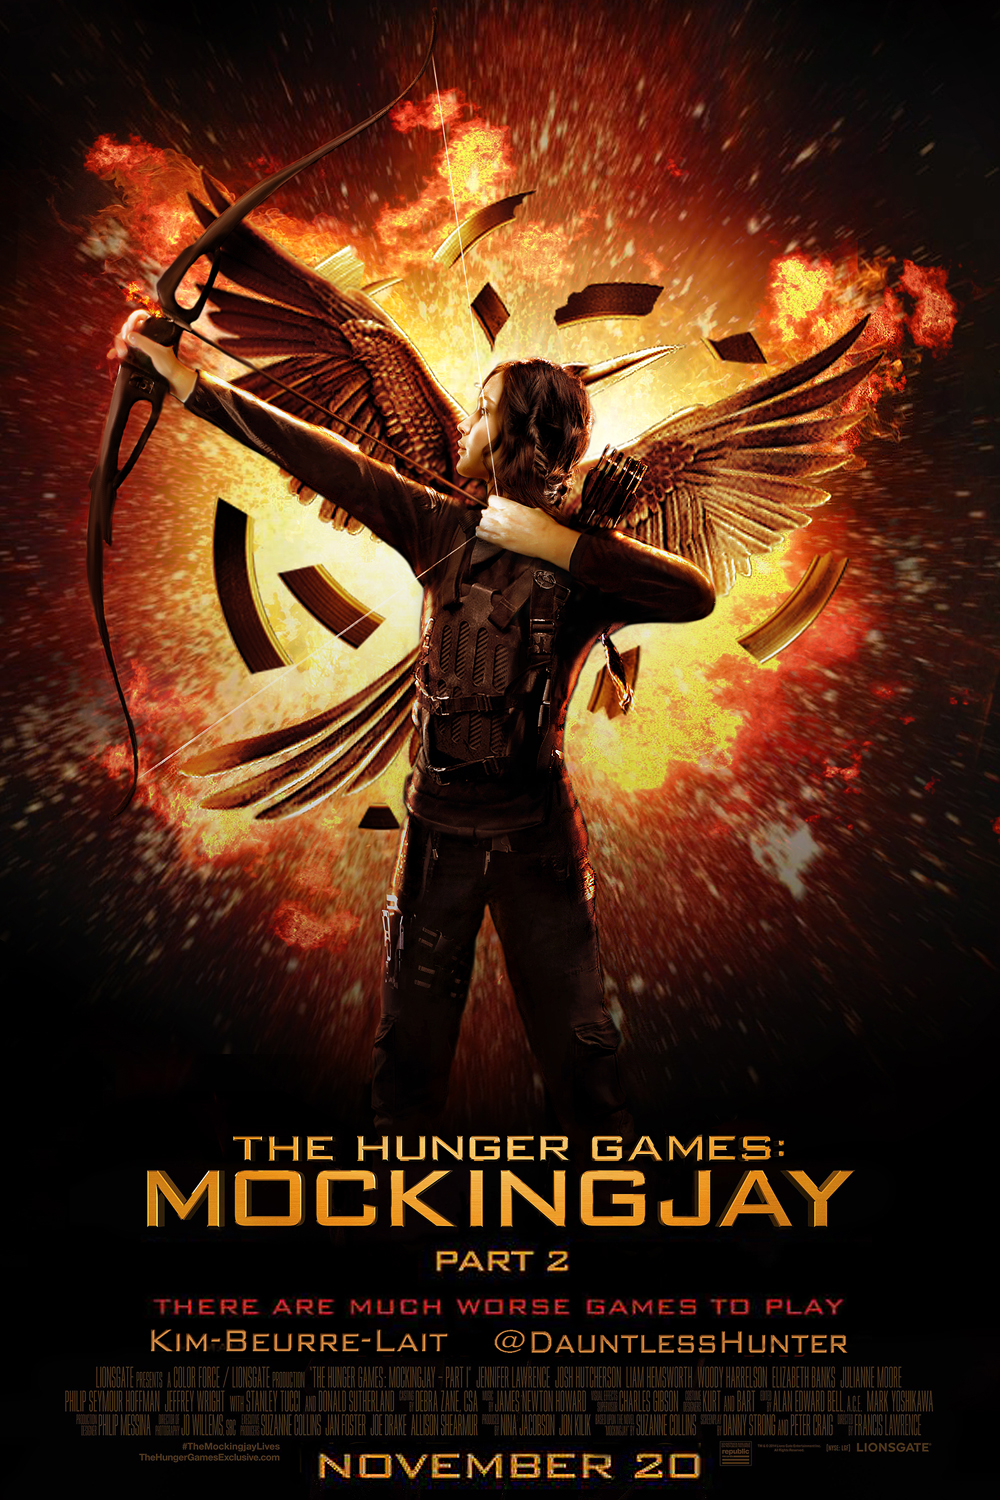 the hunger games 3 pdf